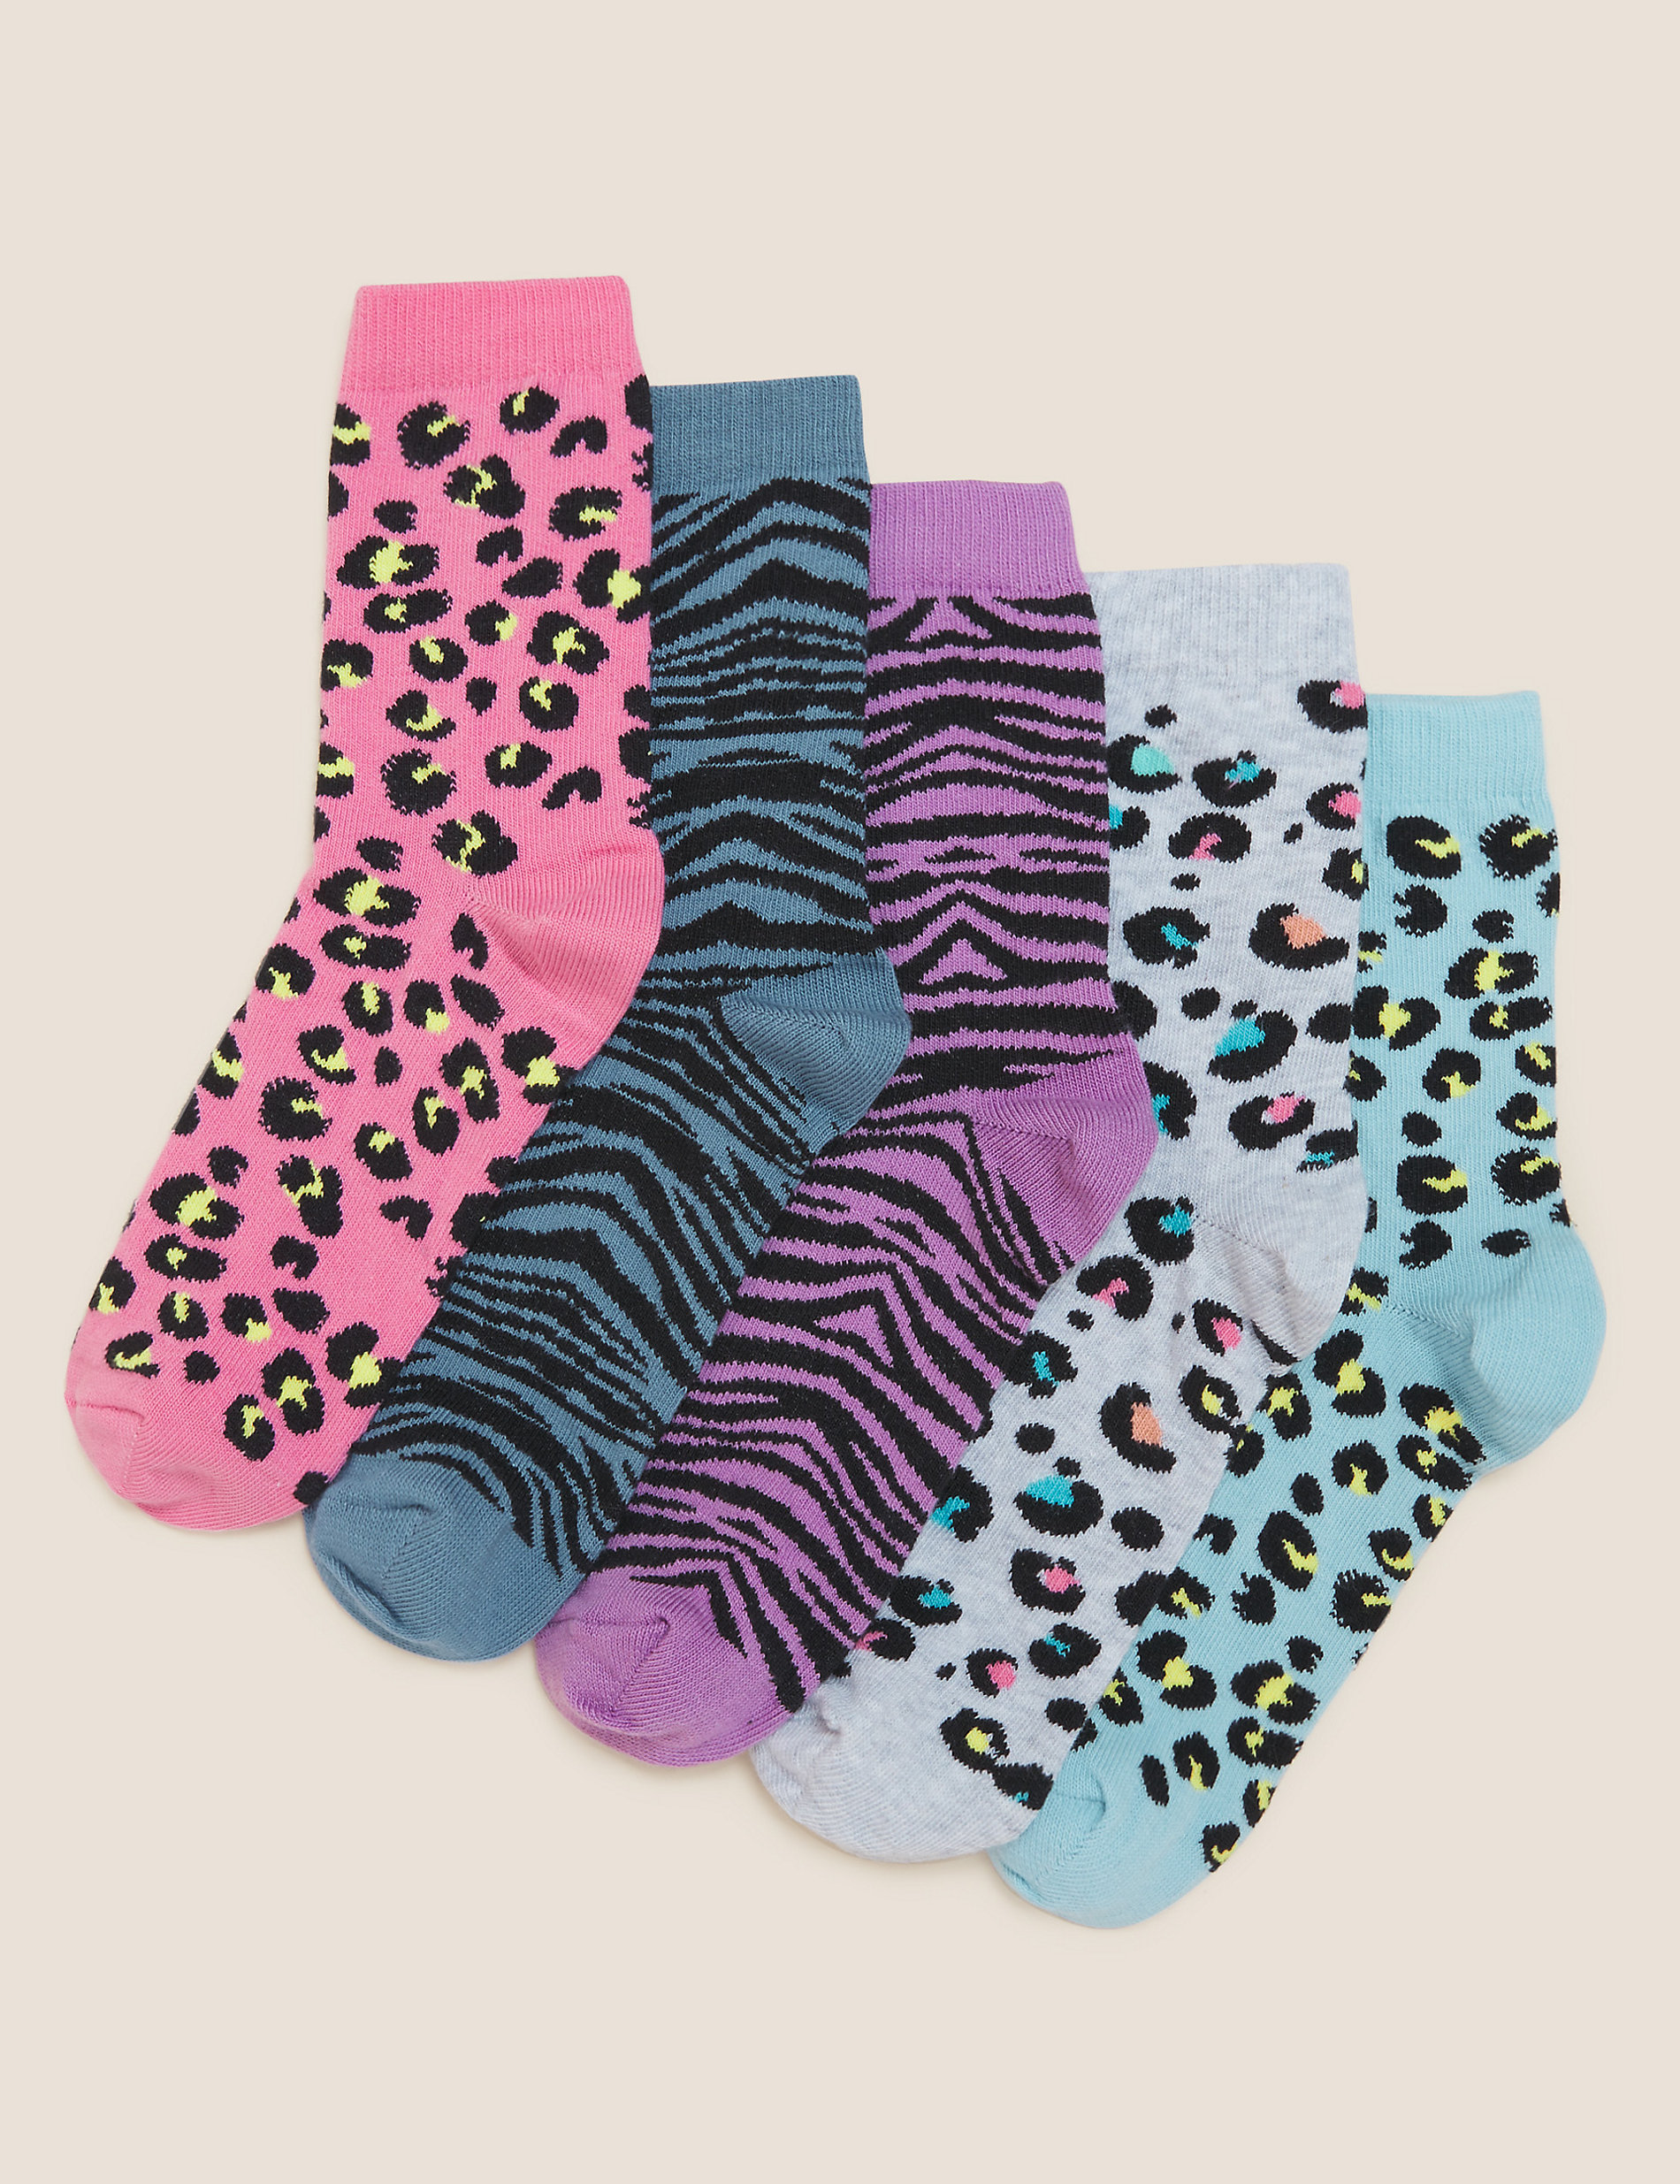 ANIMAL PRINT RICH COTTON ANKLE SOCKS 5 PACK GIRL'S ASSORTED UNICORN 